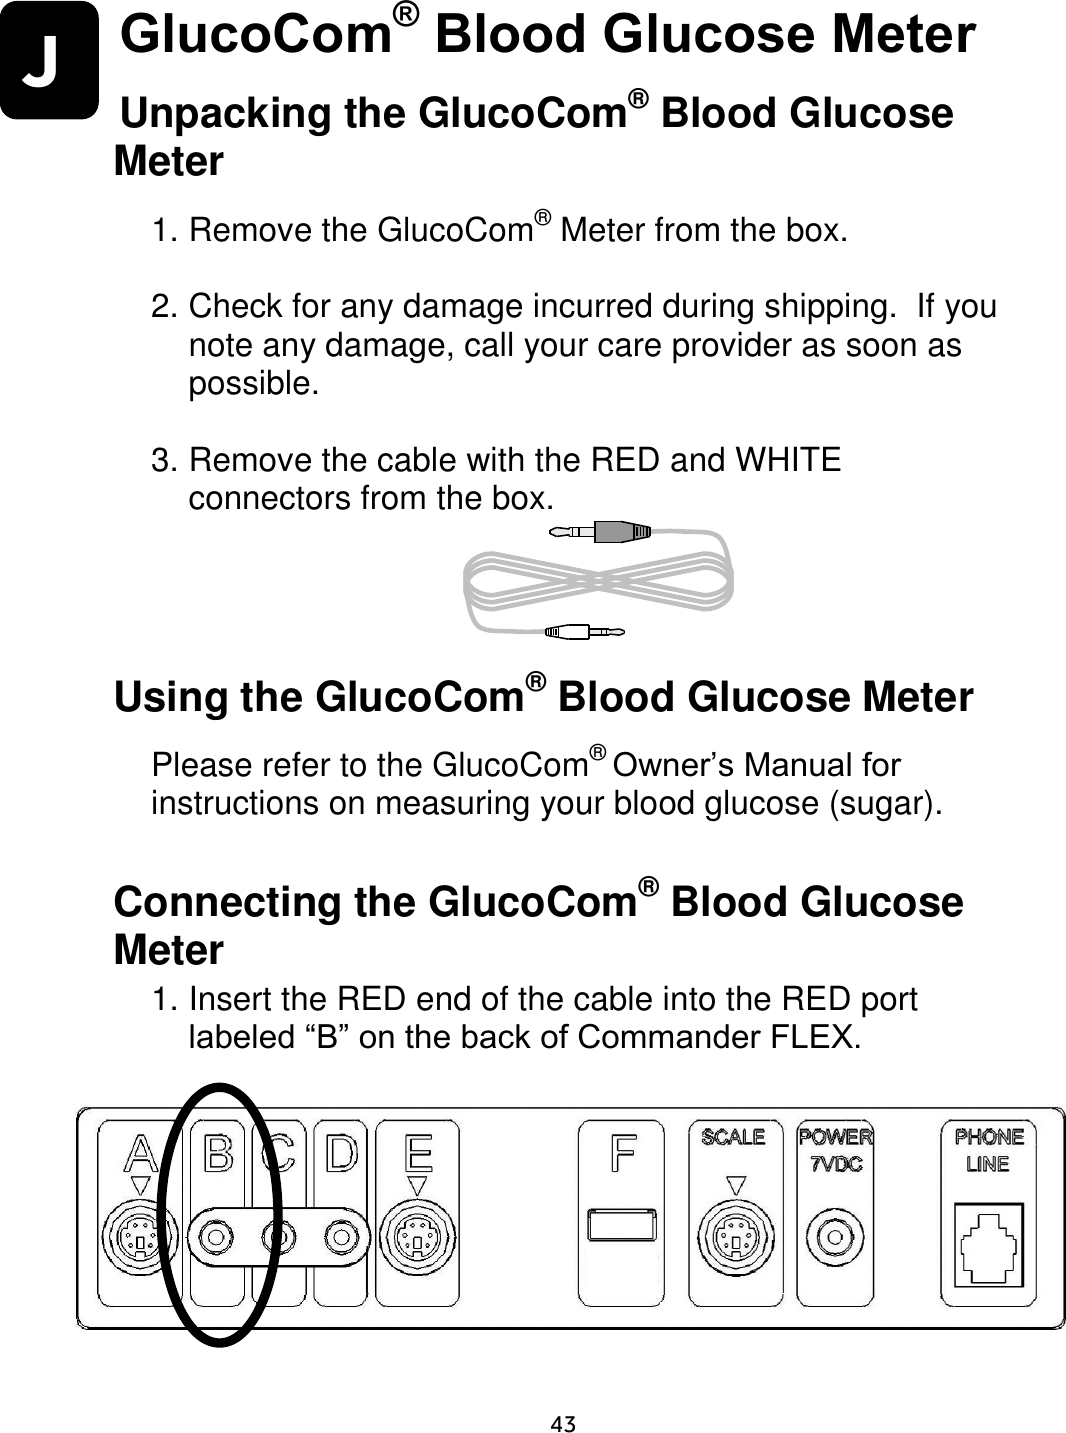                      43 J GlucoCom® Blood Glucose Meter Unpacking the GlucoCom® Blood Glucose Meter  1. Remove the GlucoCom® Meter from the box.    2. Check for any damage incurred during shipping.  If you note any damage, call your care provider as soon as possible.   3. Remove the cable with the RED and WHITE connectors from the box.        Using the GlucoCom® Blood Glucose Meter  Please refer to the GlucoCom® Owner’s Manual for instructions on measuring your blood glucose (sugar).  Connecting the GlucoCom® Blood Glucose Meter 1. Insert the RED end of the cable into the RED port labeled “B” on the back of Commander FLEX.         